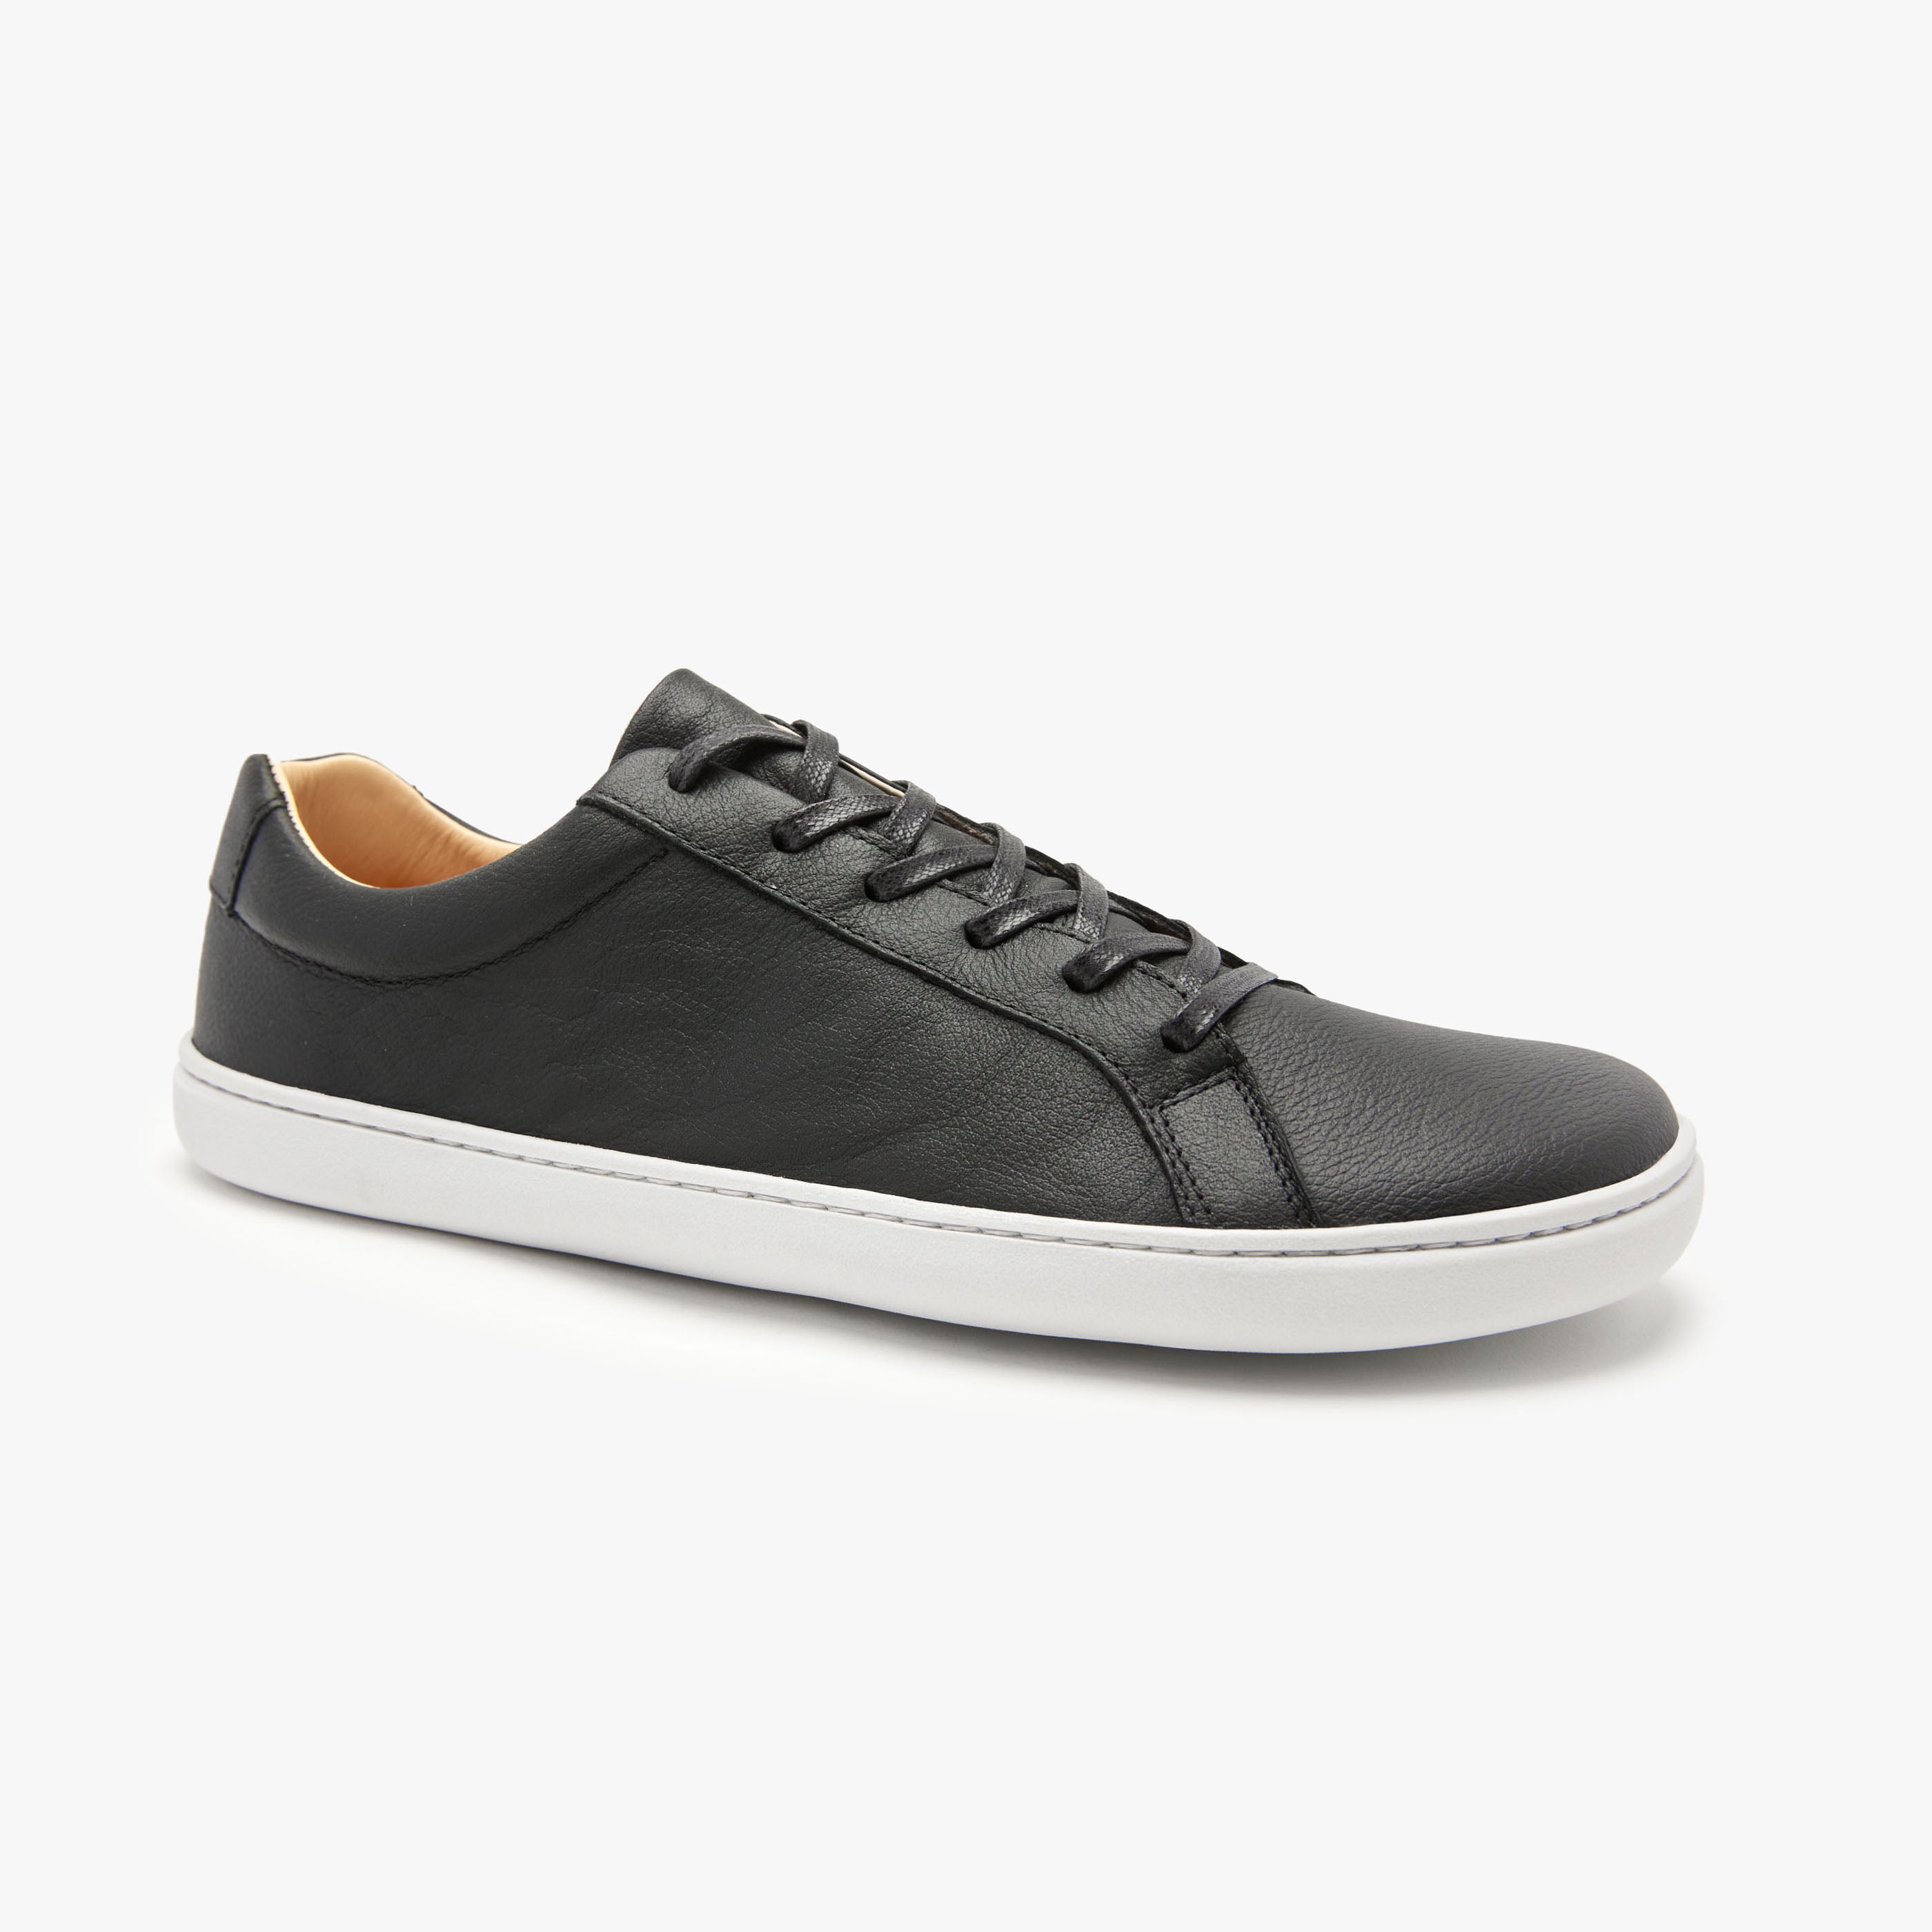 Barefoot shoes - Men - Black - Natural Leather - The Everyday Sneaker ...